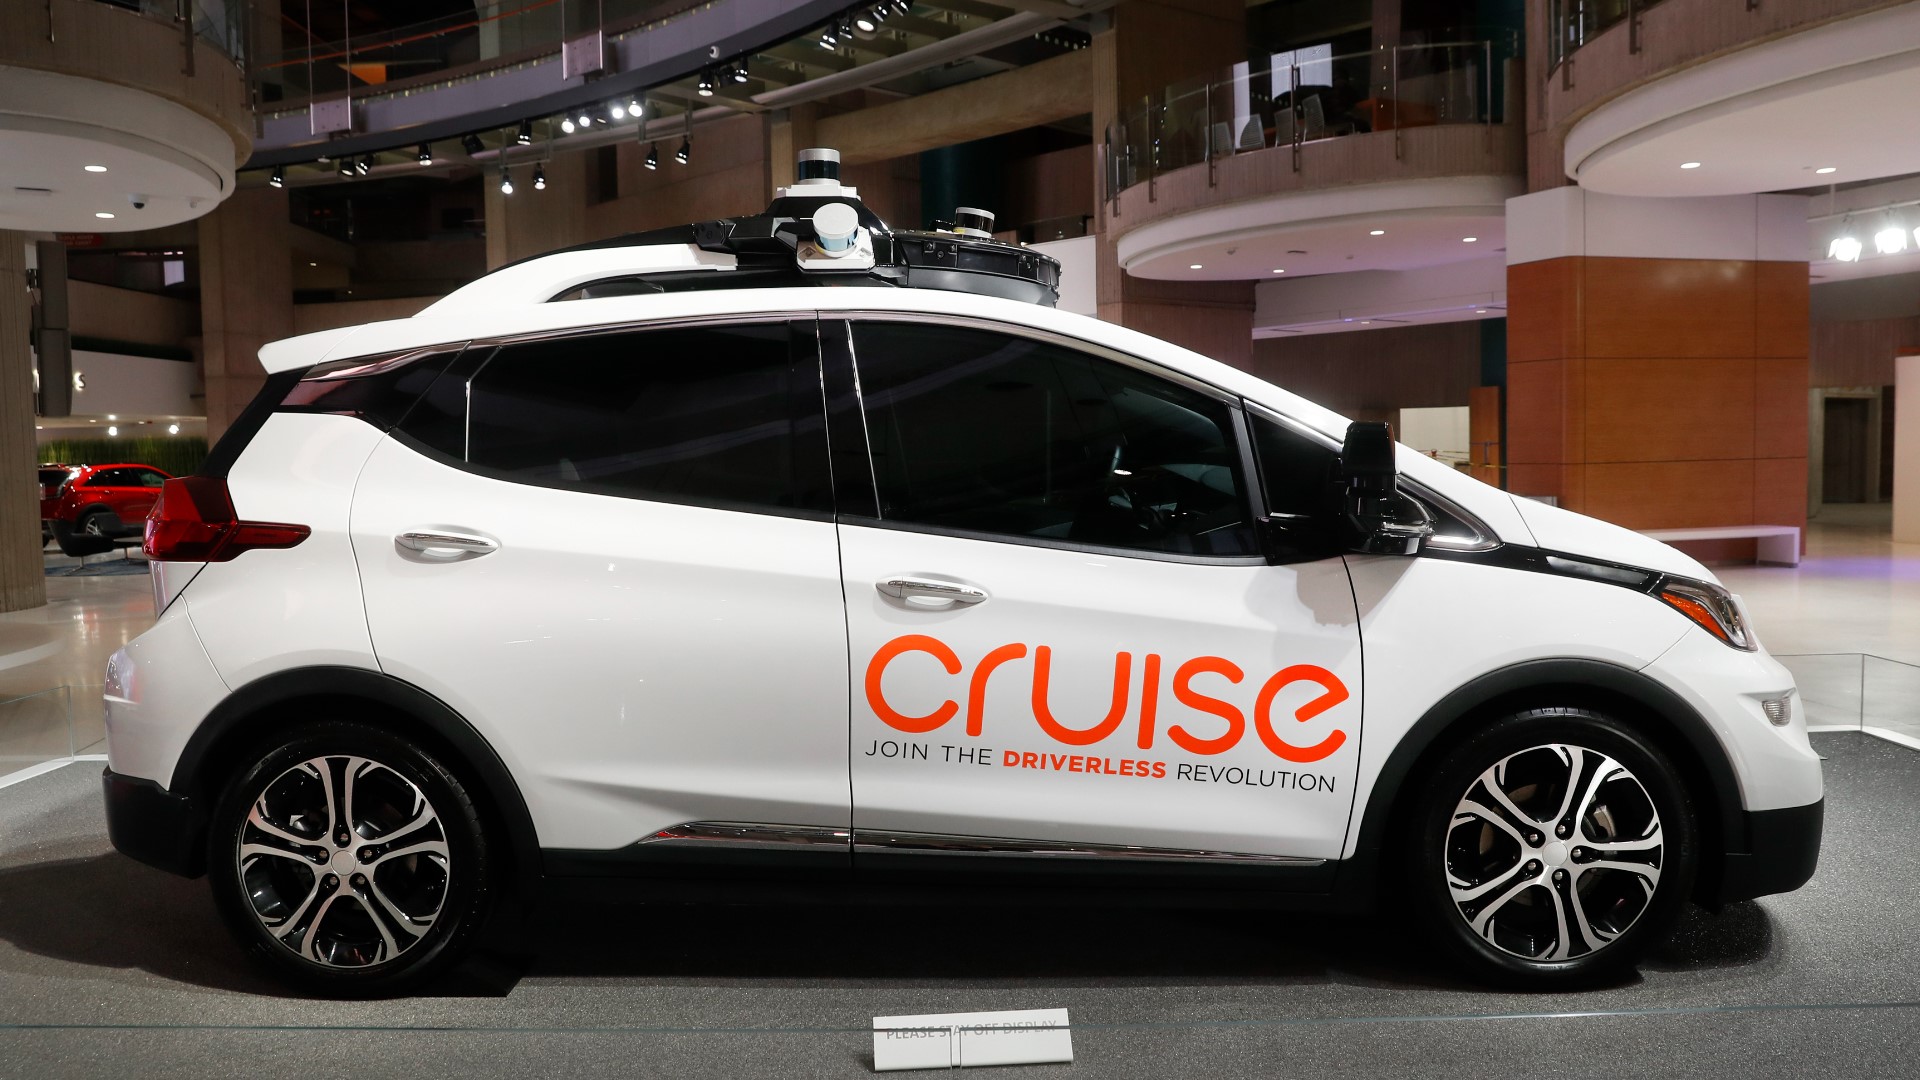 Cruise says its fleet of self-driving cars will be ready to pick up riders by early 2024. Others aren't a fan of the concept.